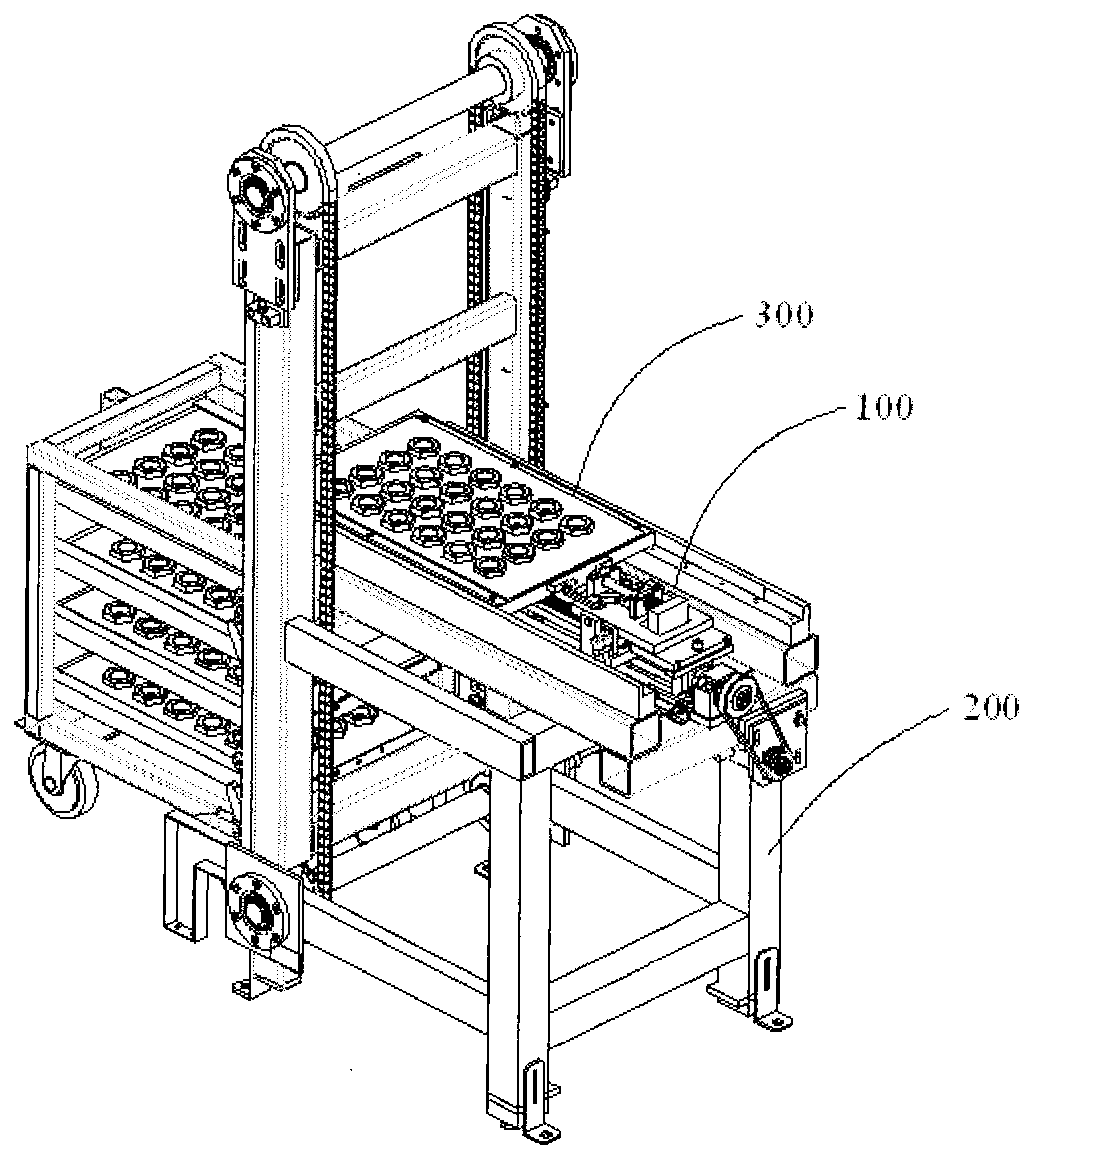 Drawer bin purely mechanical type capturing location device